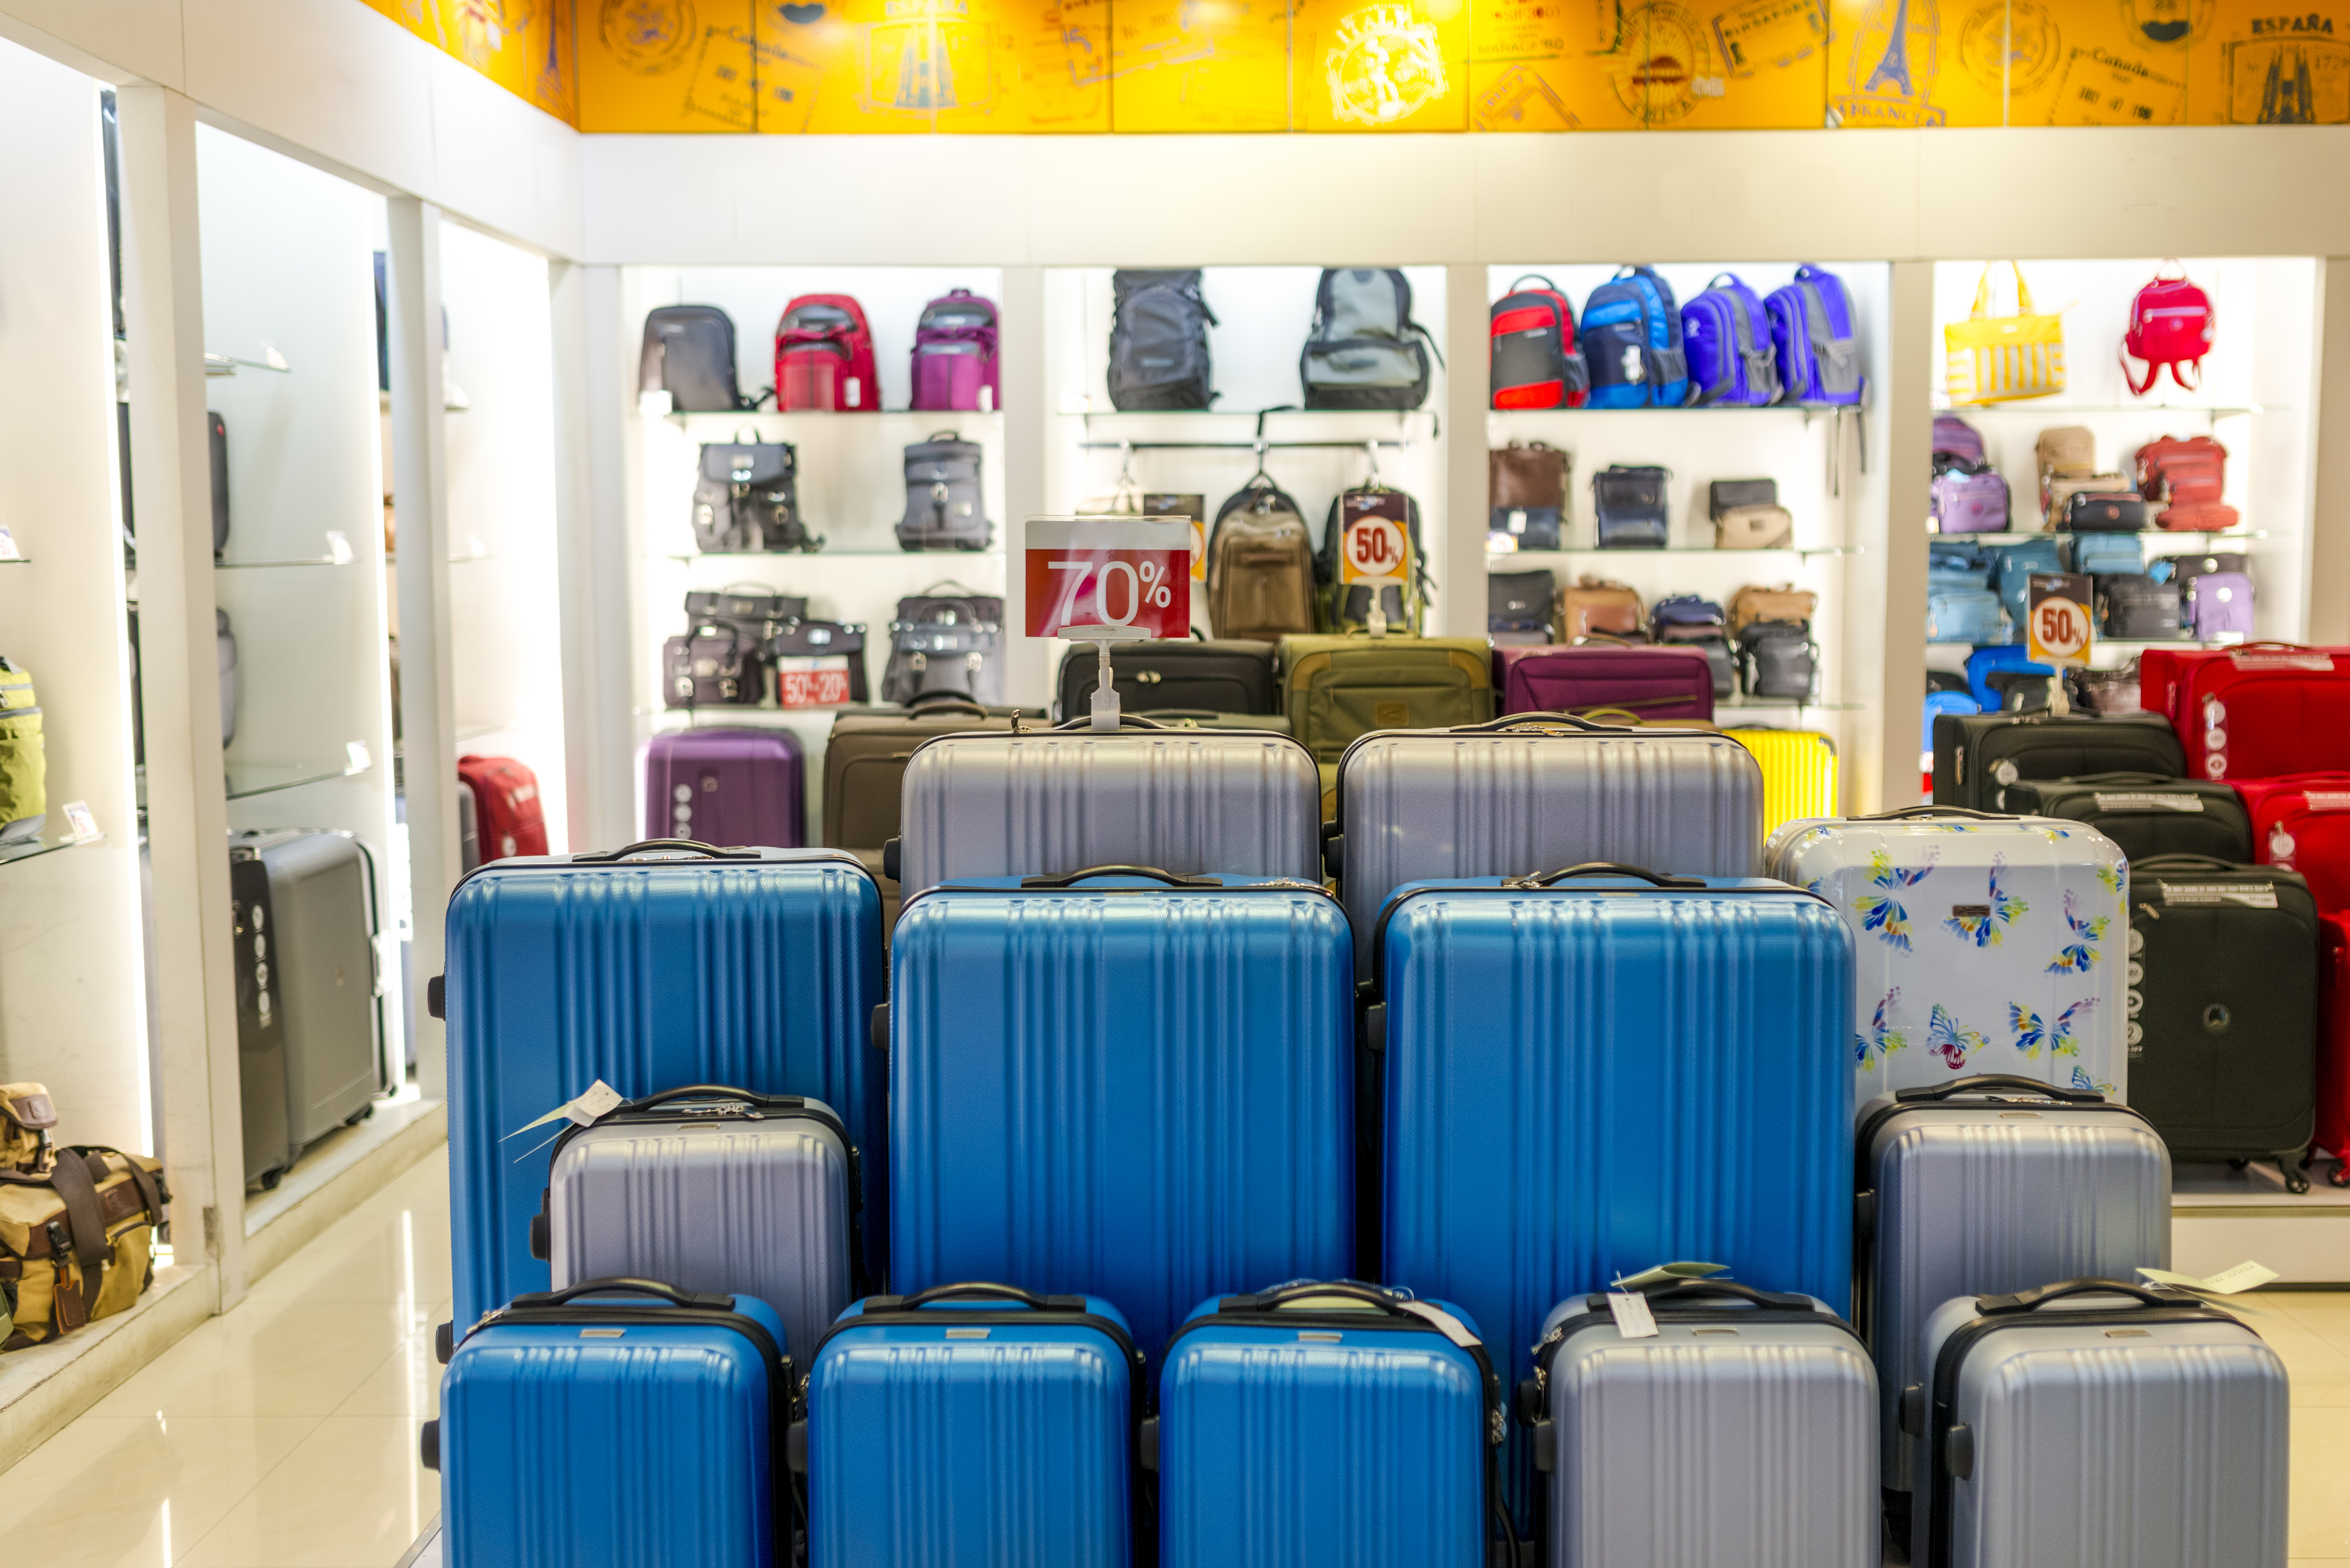 7 places to find the best deal on luggage